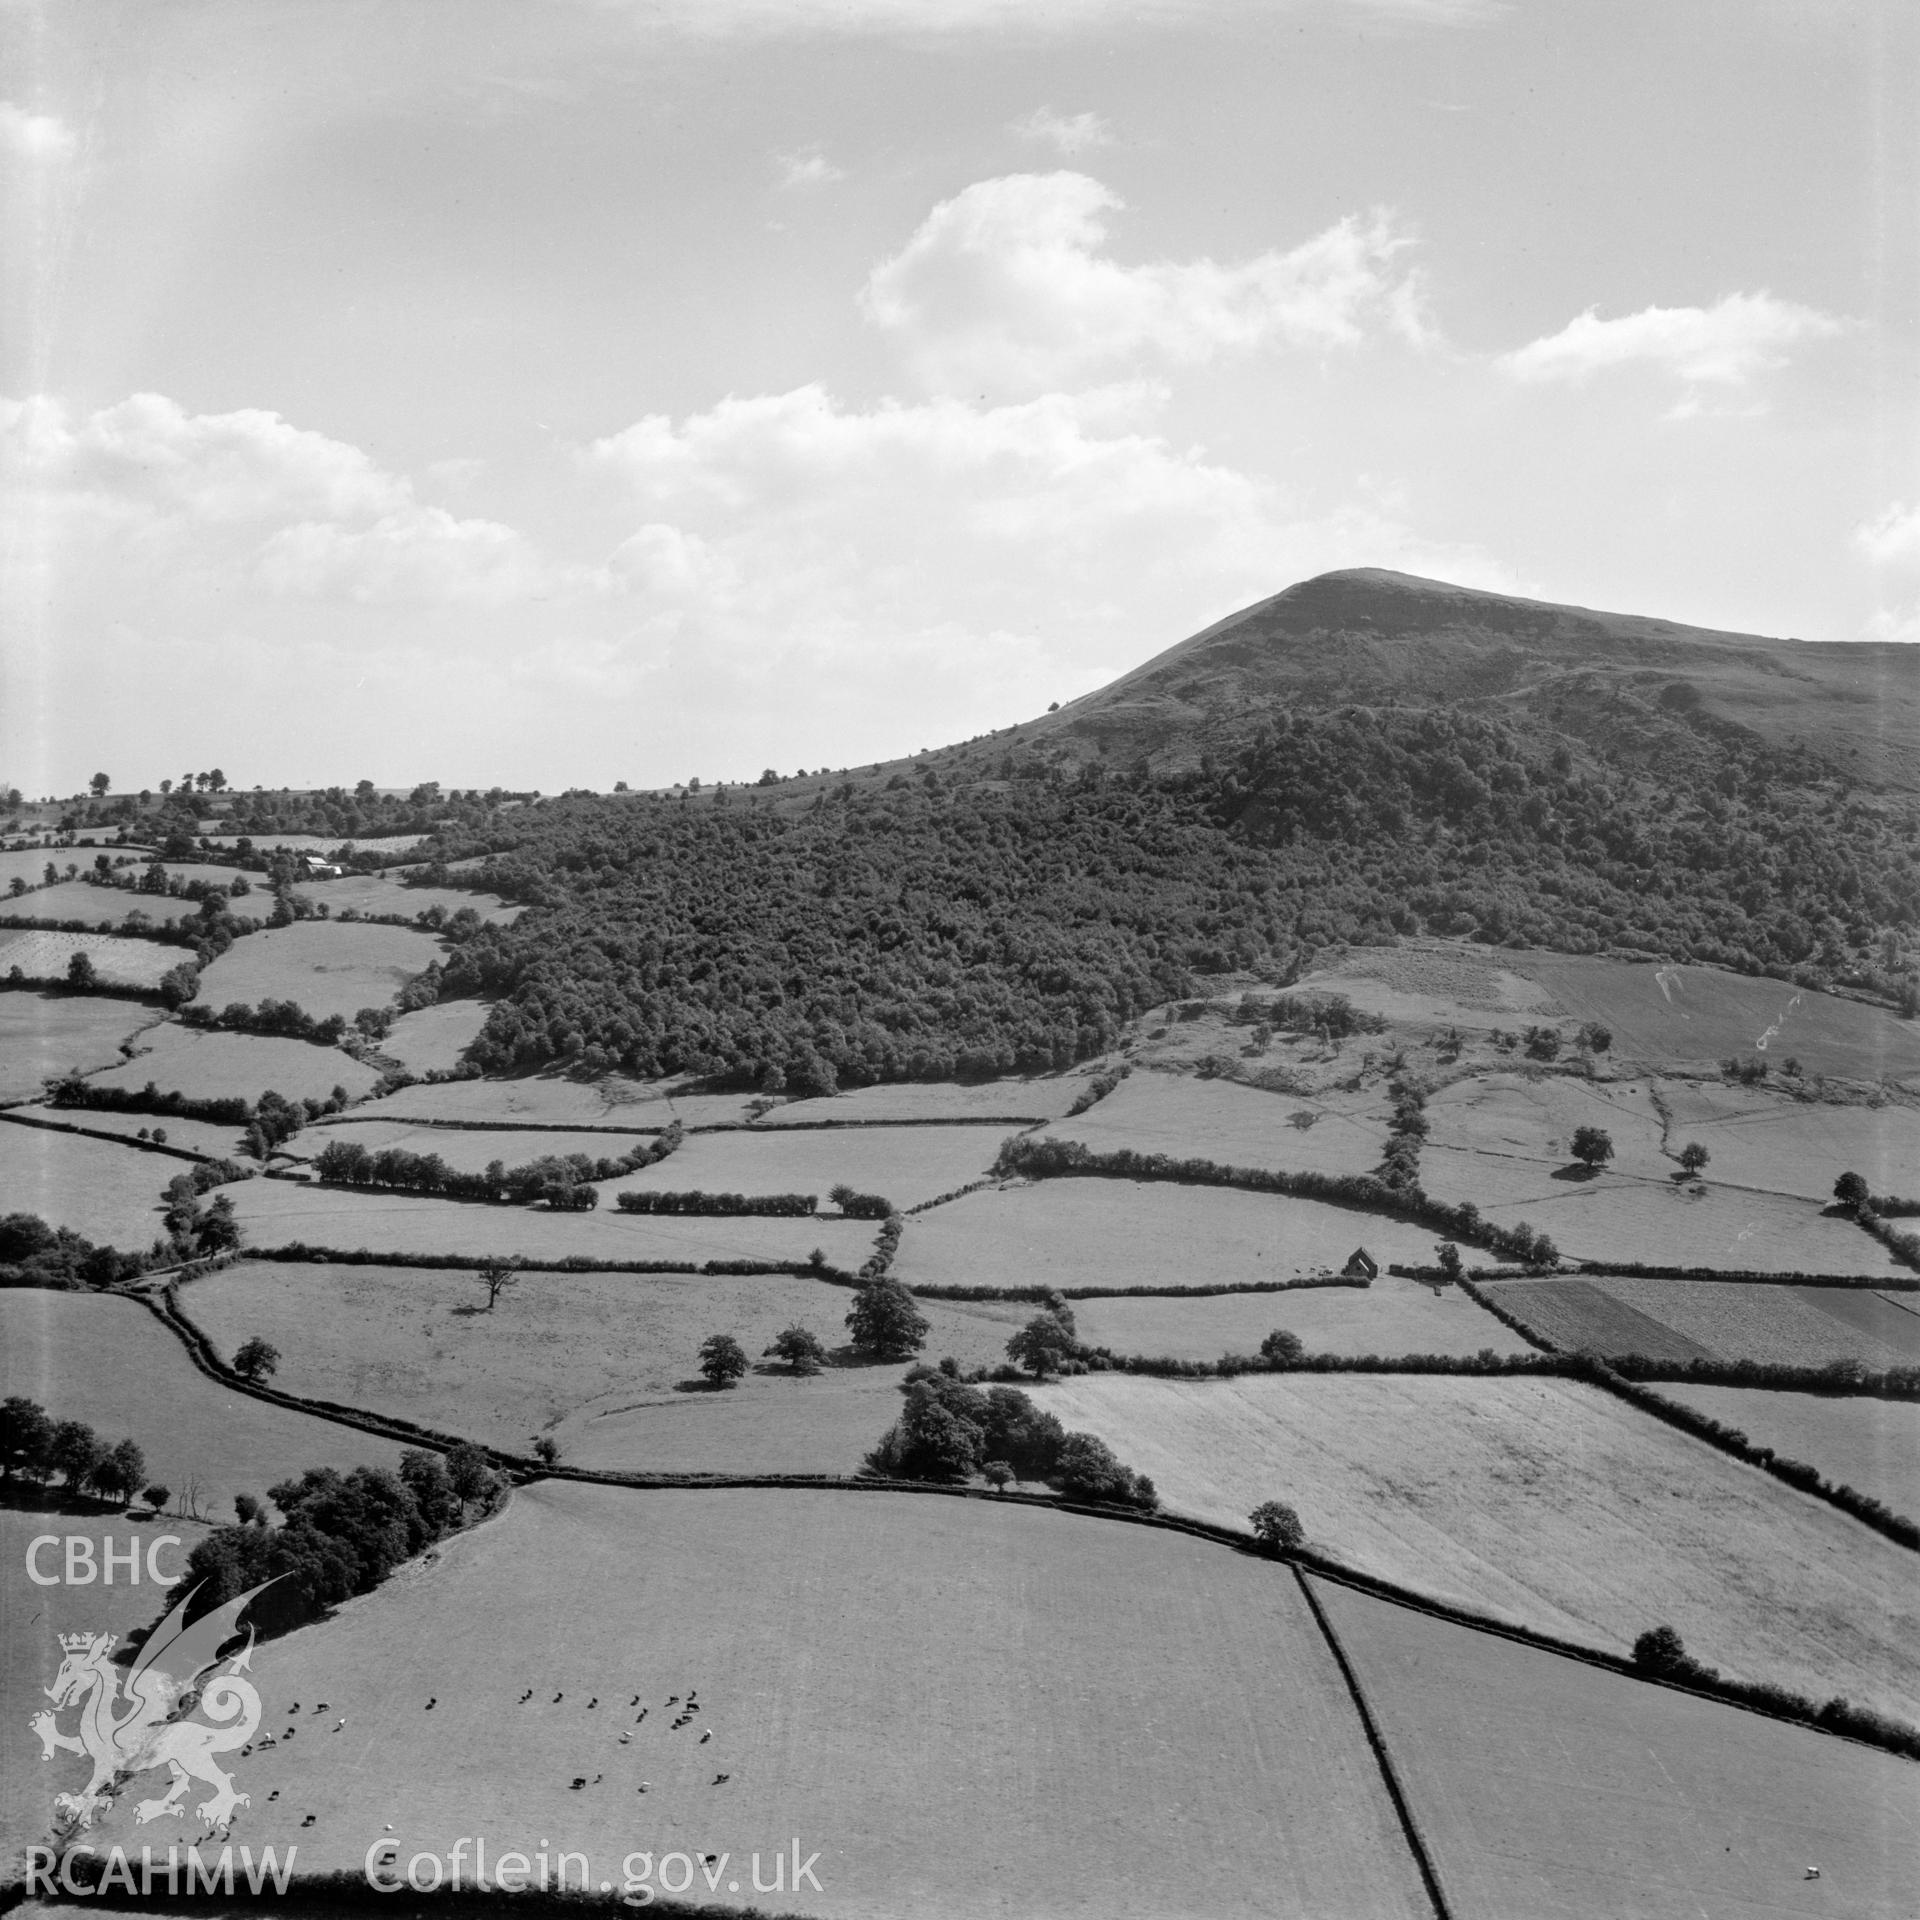 View possibly of the Sugarloaf, Abergavenny